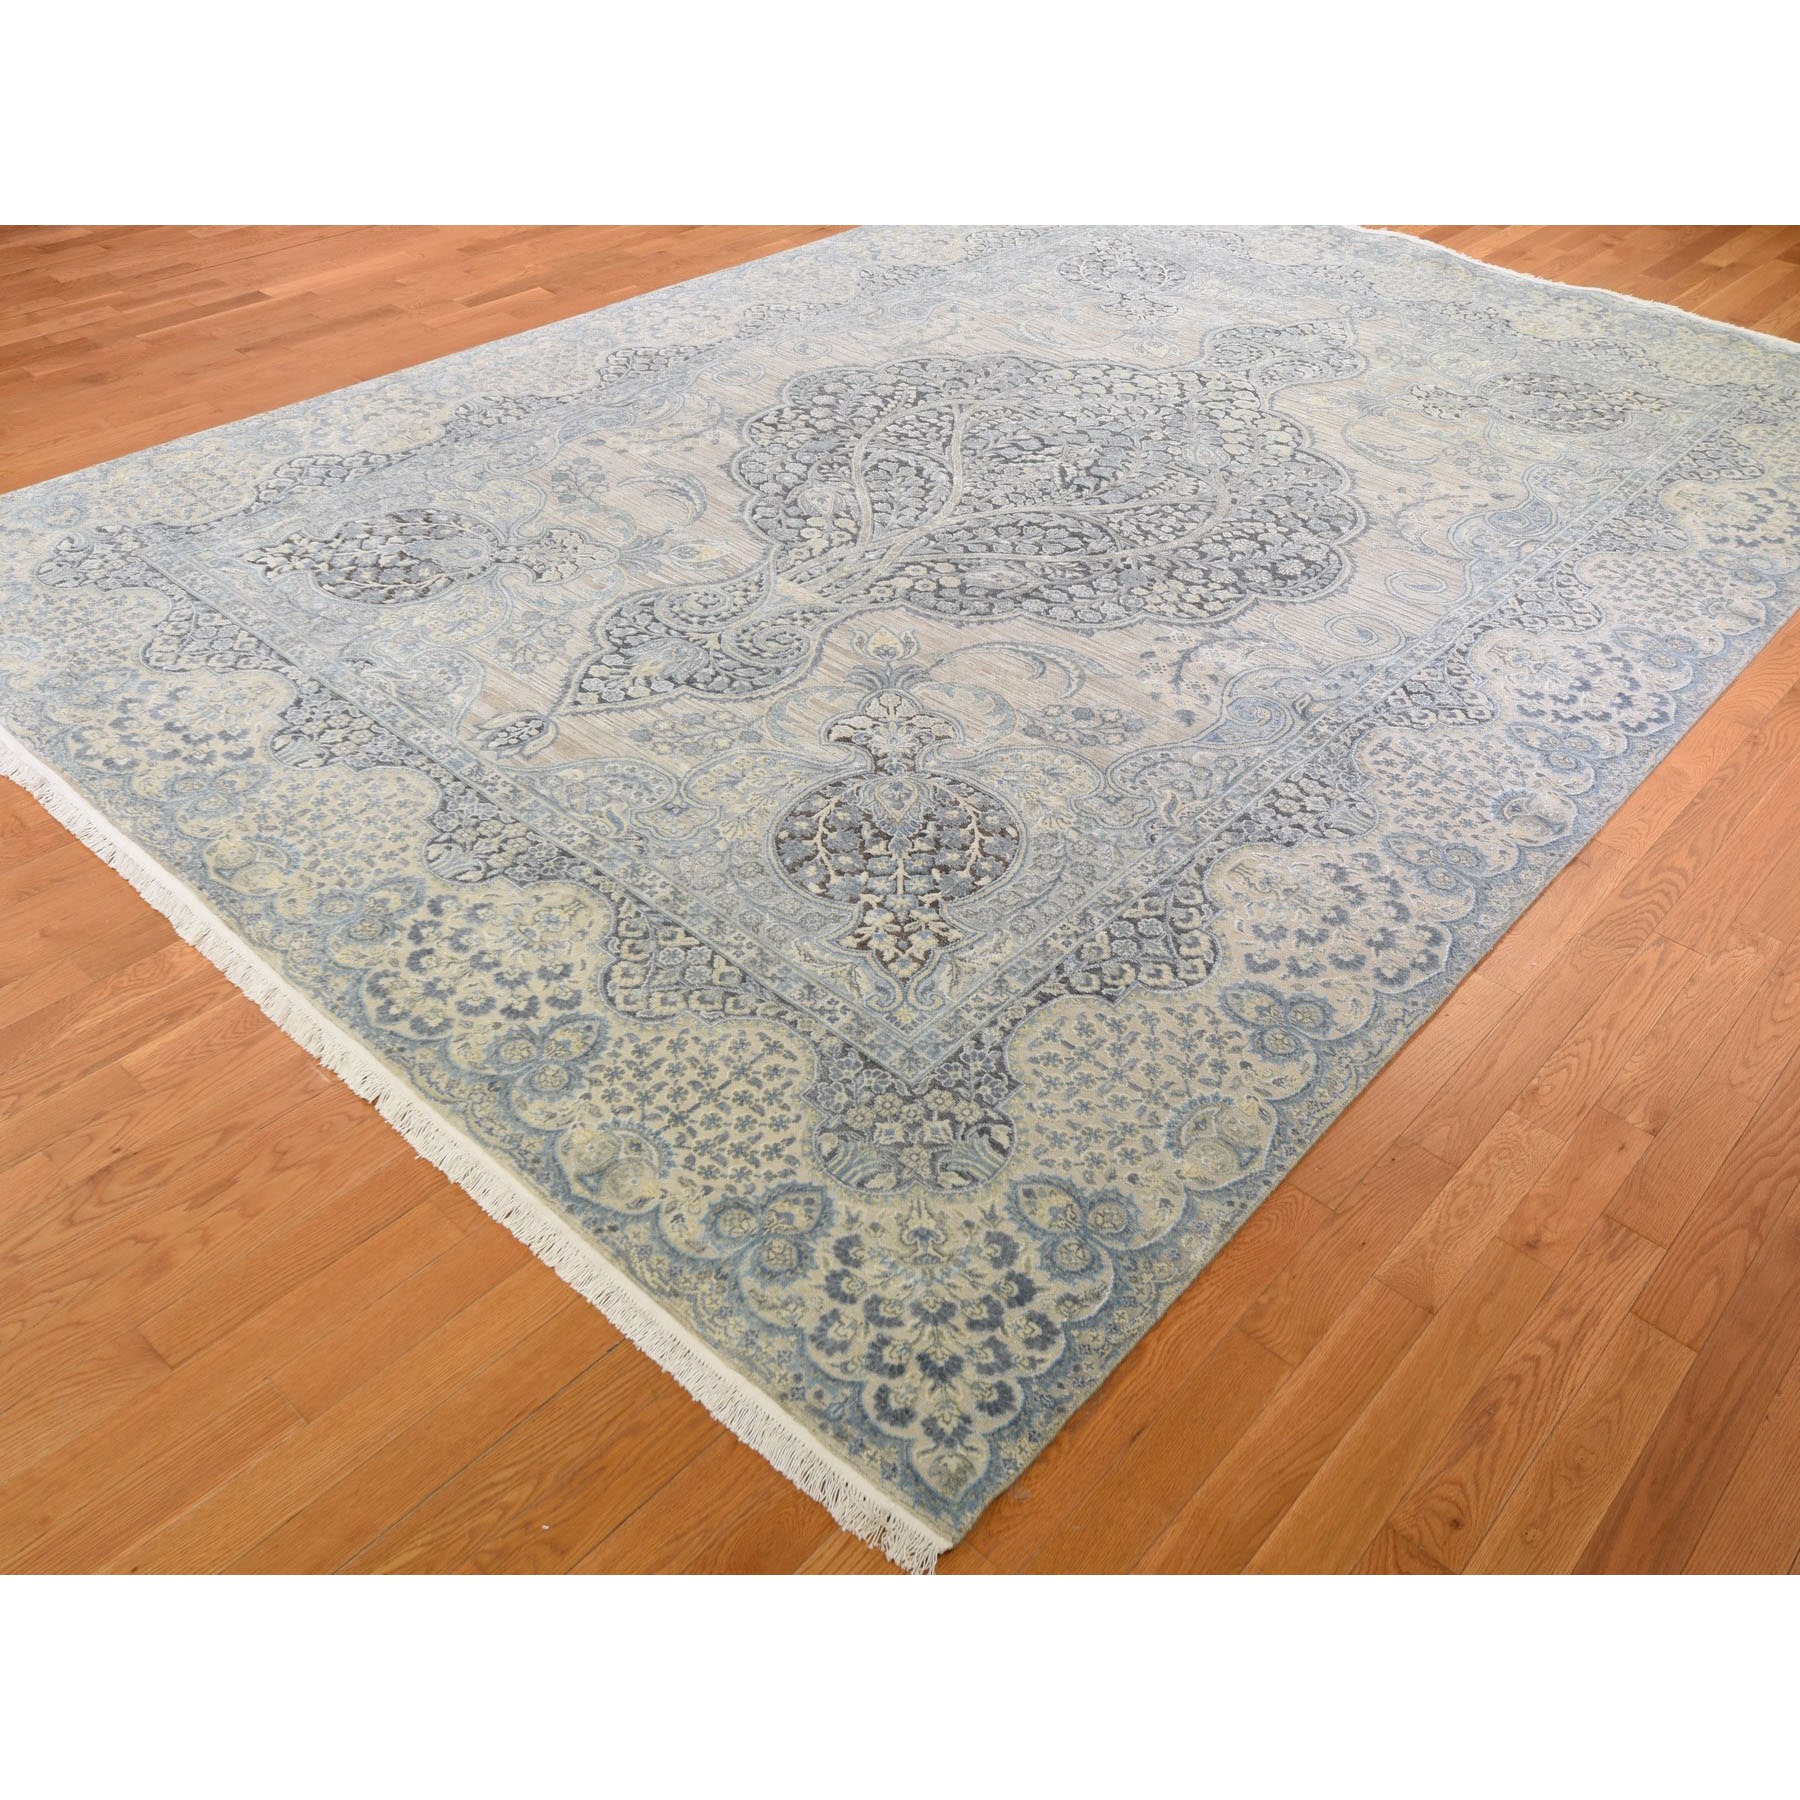 9-9 x13-9  Tree Of Life Meditation Design Silk With Textured Wool Hand Knotted Oriental Rug 